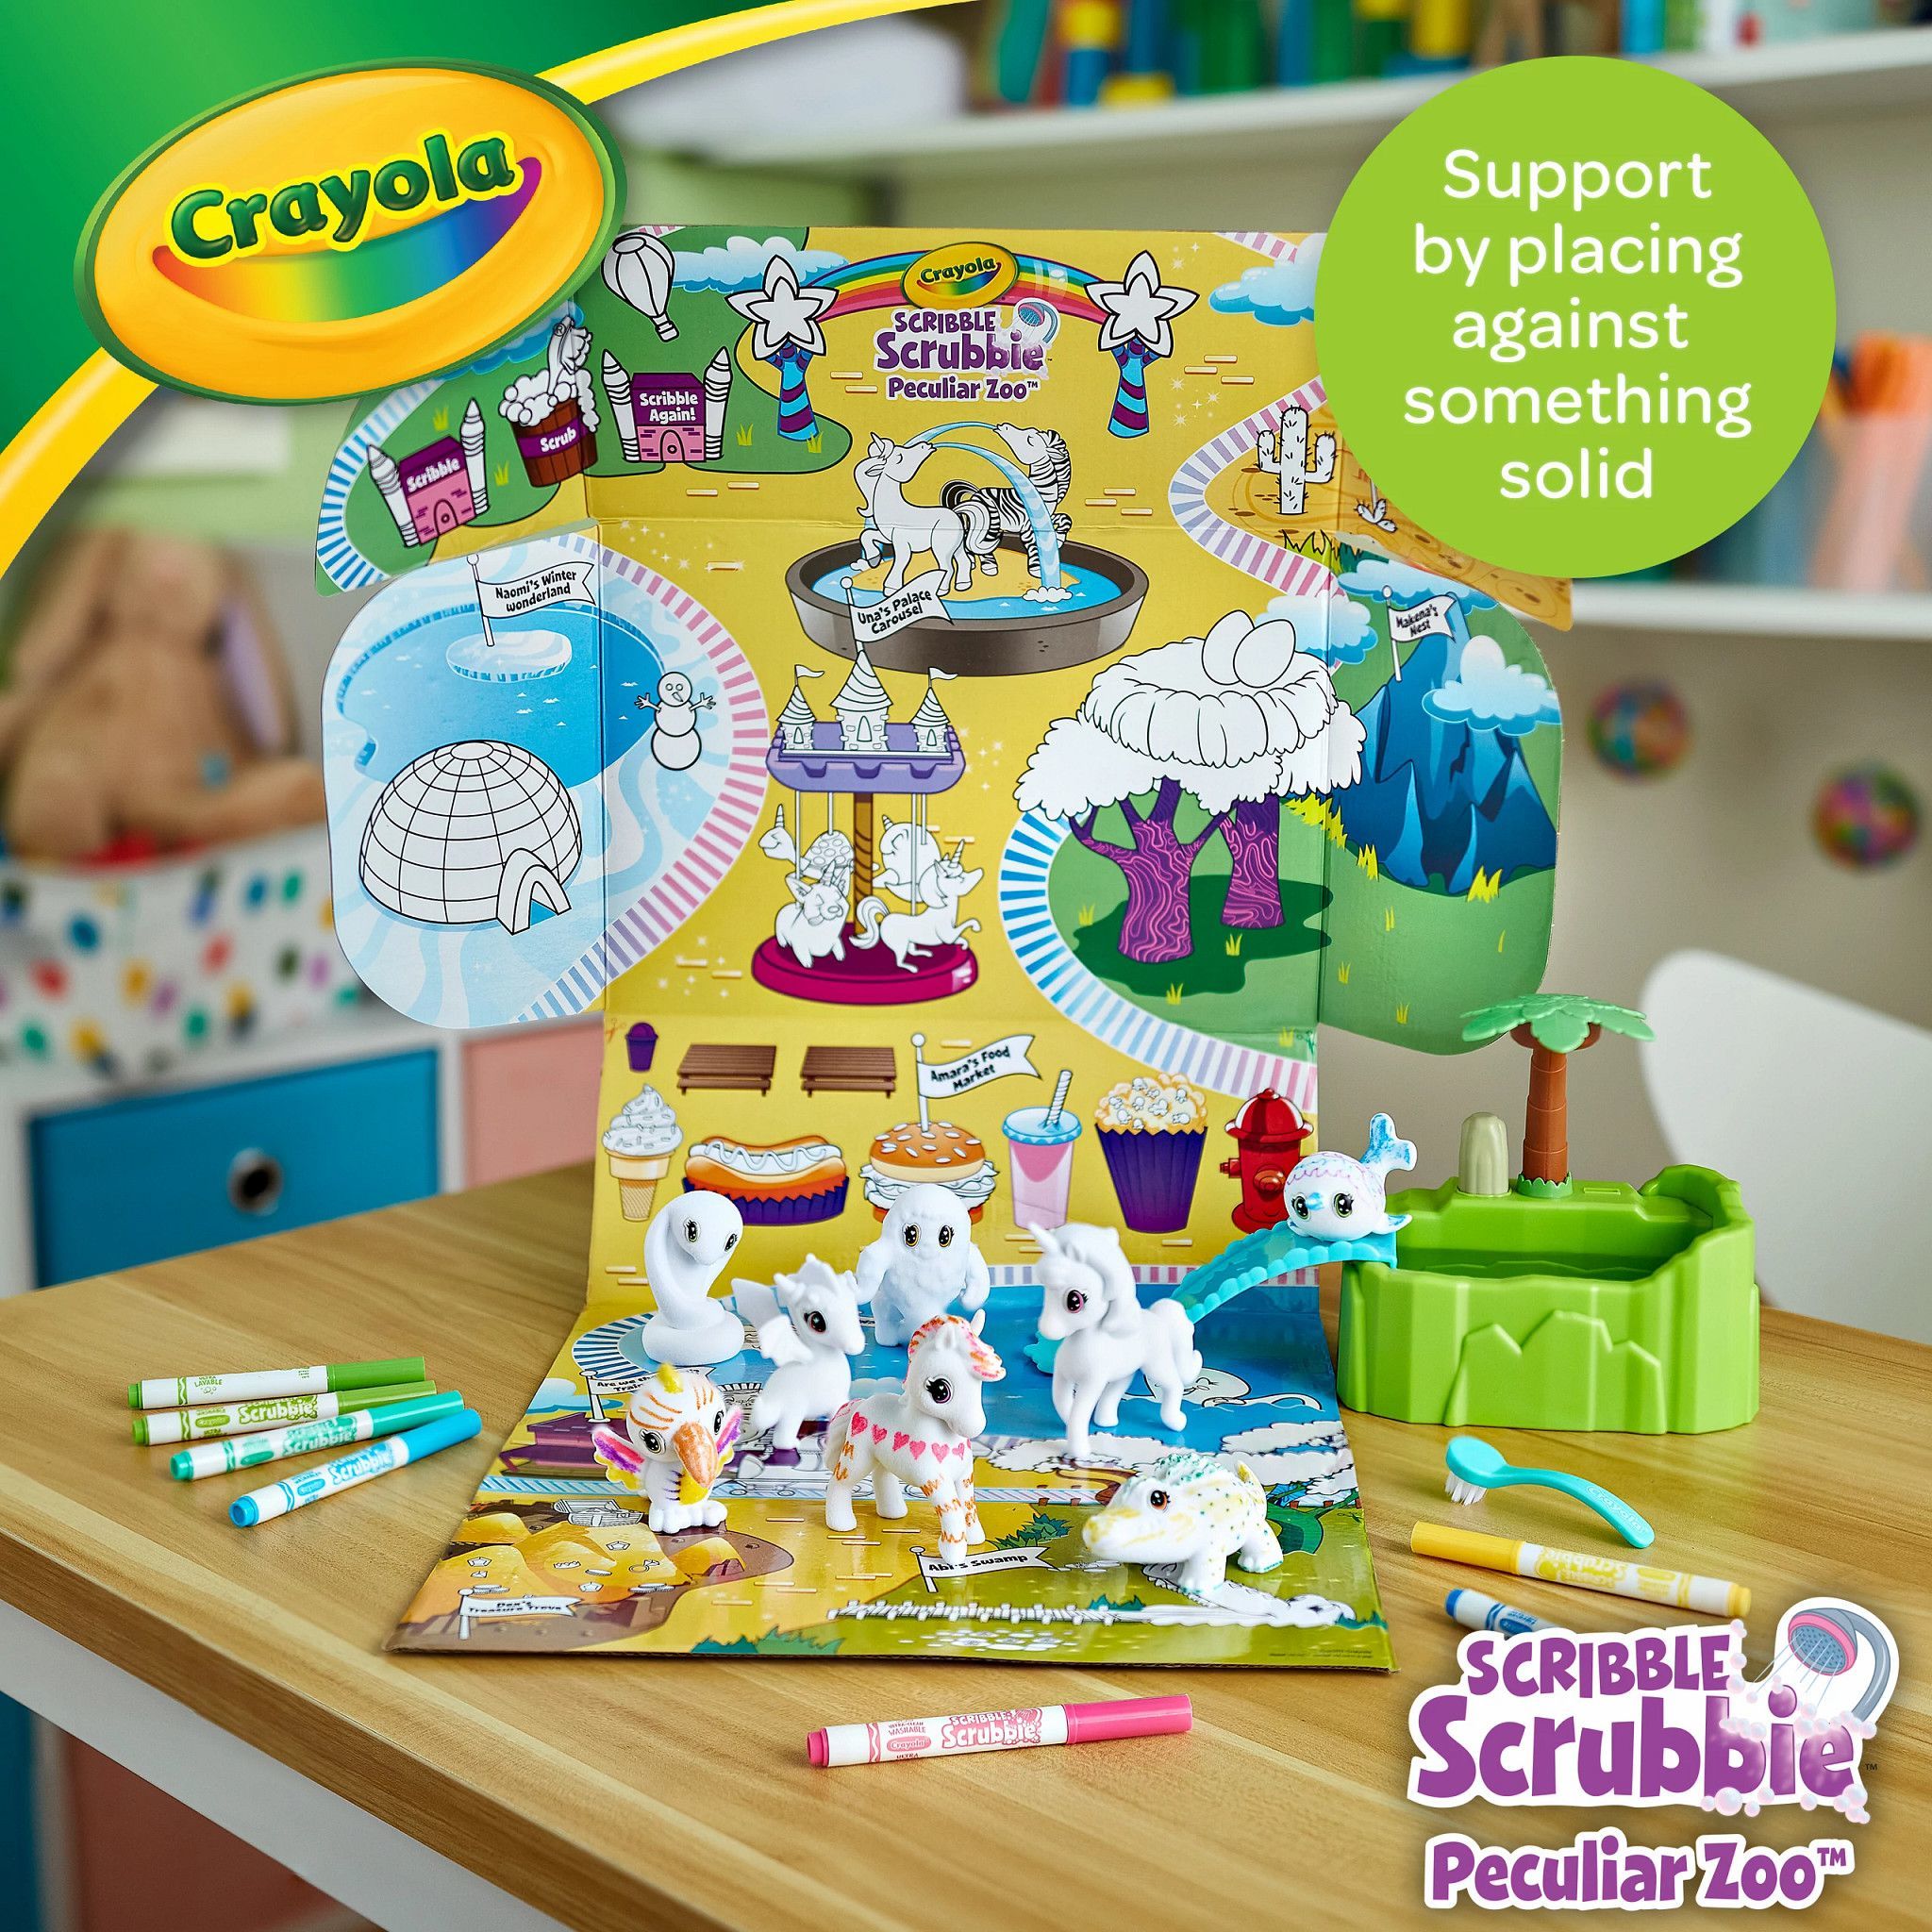 Crayola Scribble Scrubbie Peculiar Zoo Mess Free Playset, Creative Toys, Gift for Beginner Child - image 6 of 9